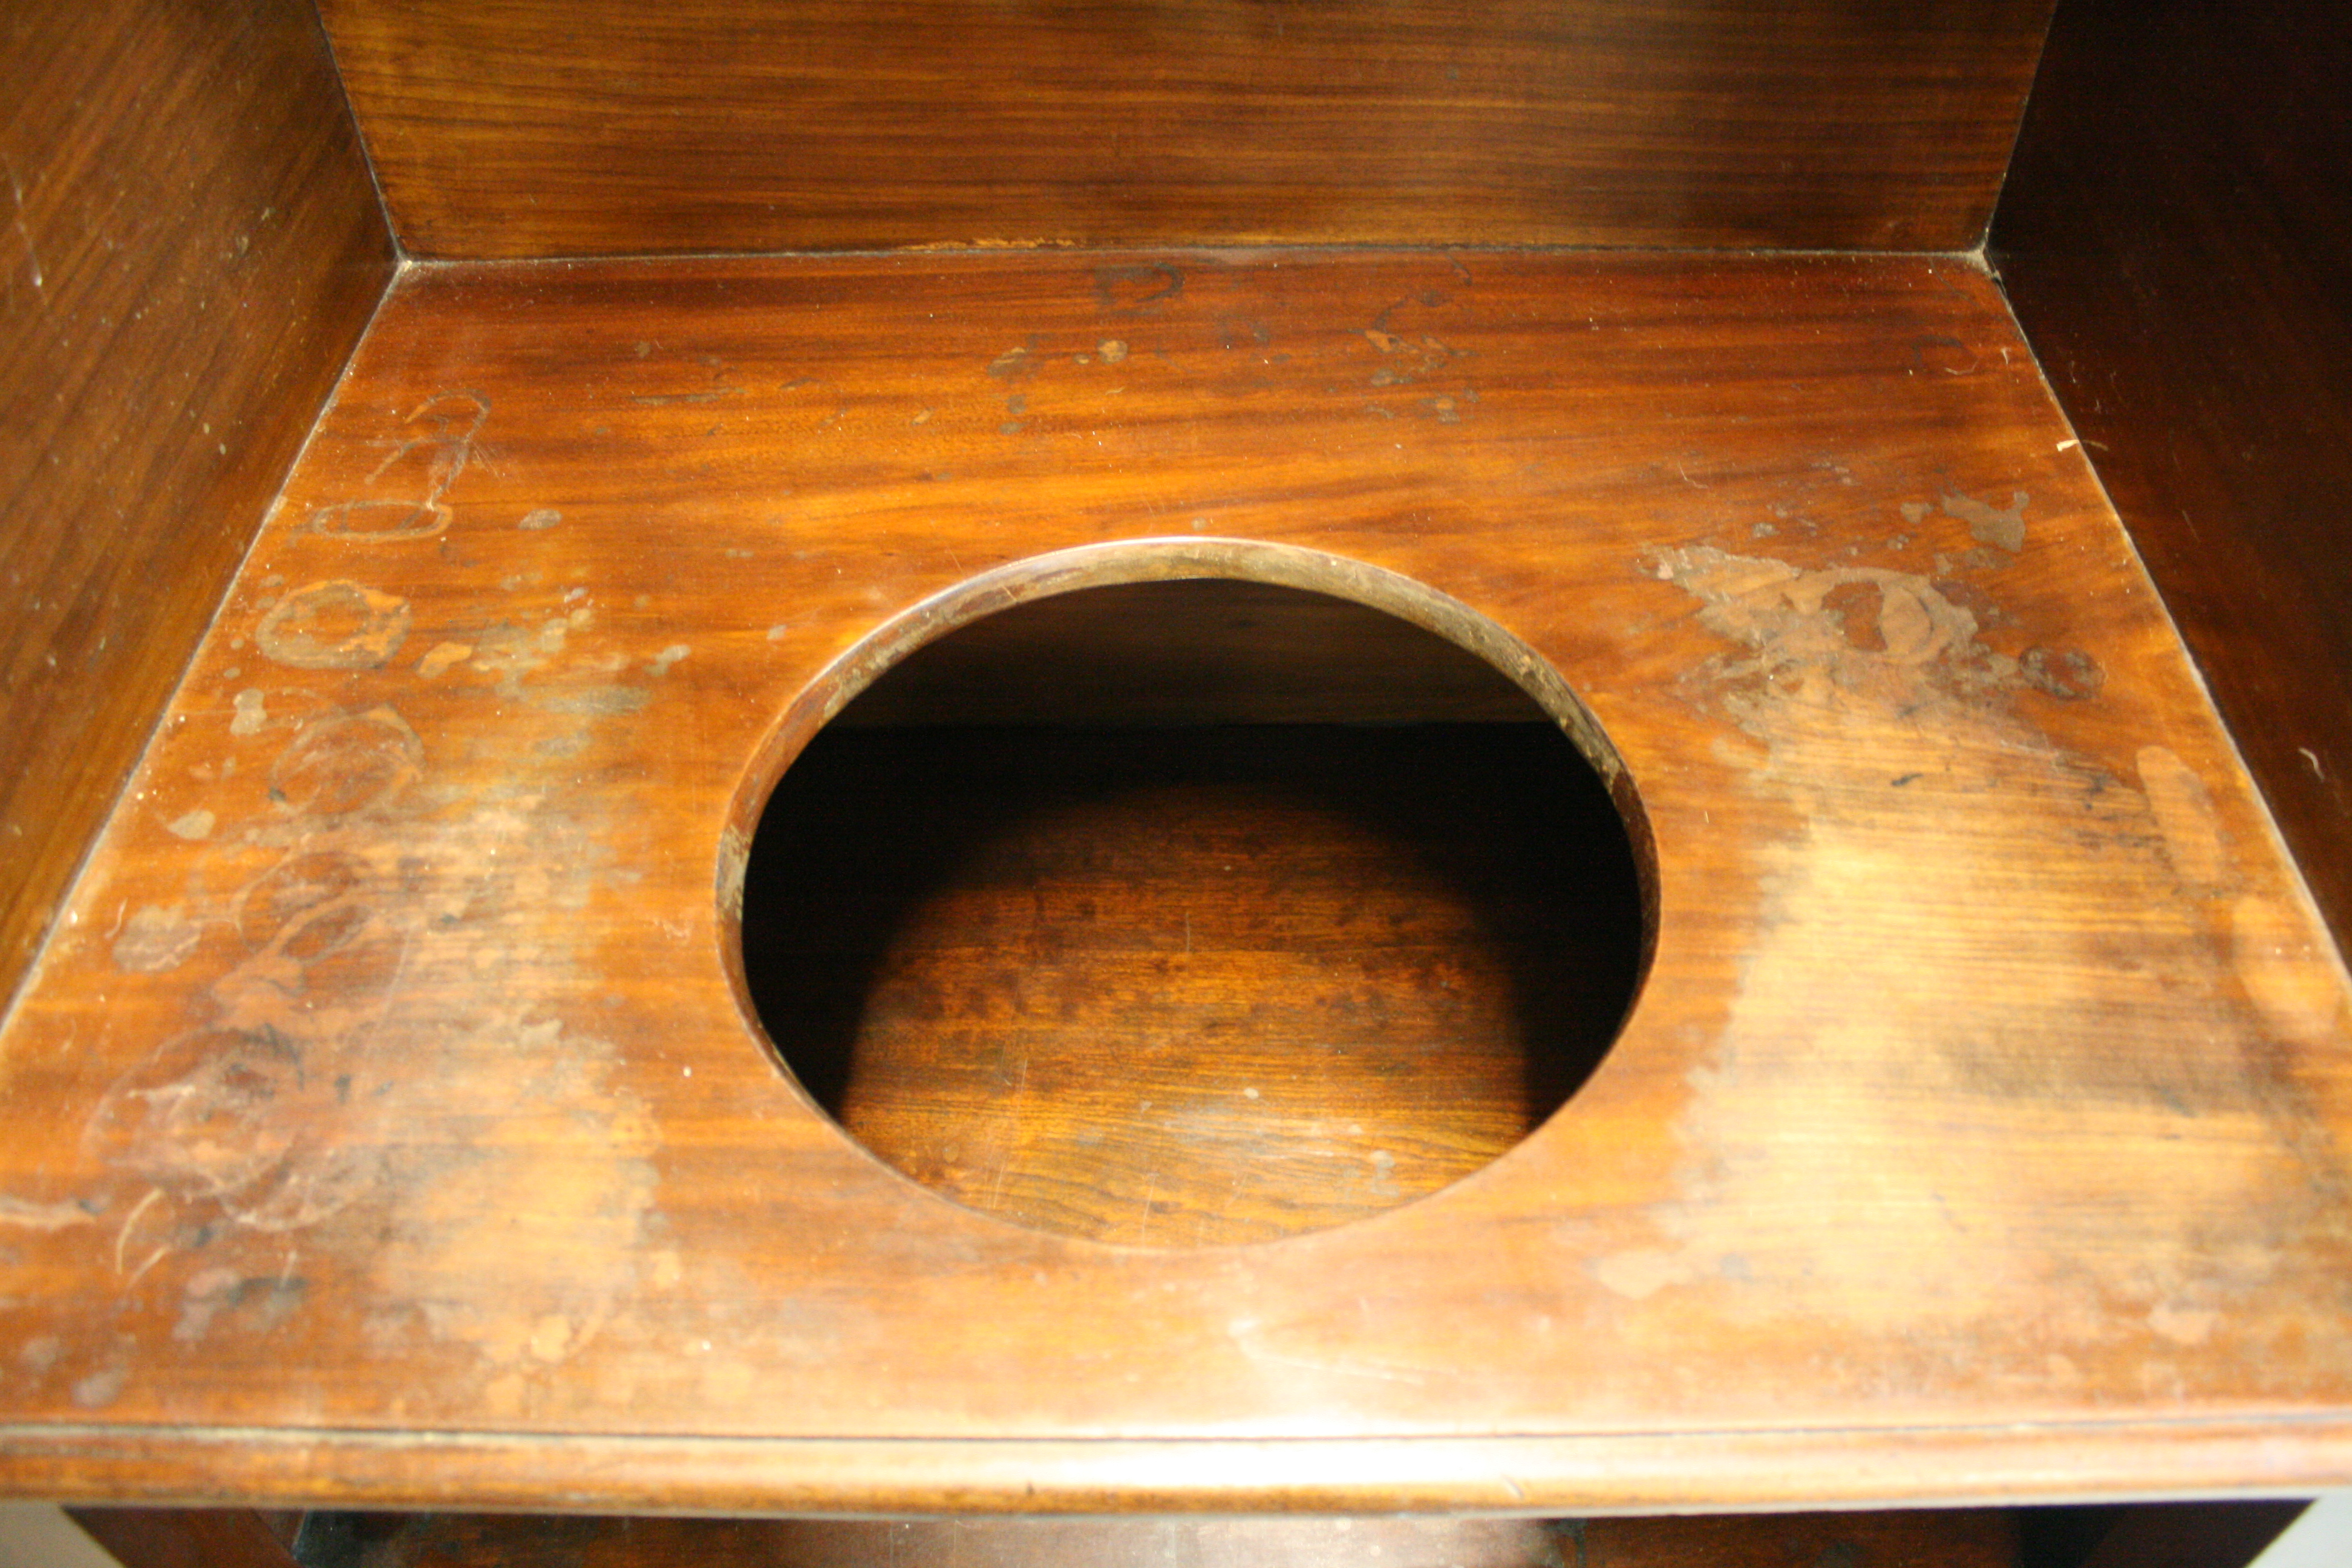 GEORGE IV WASH STAND - a George IV mahogany wash stand measuring 123.5x75x57cm. - Image 2 of 3